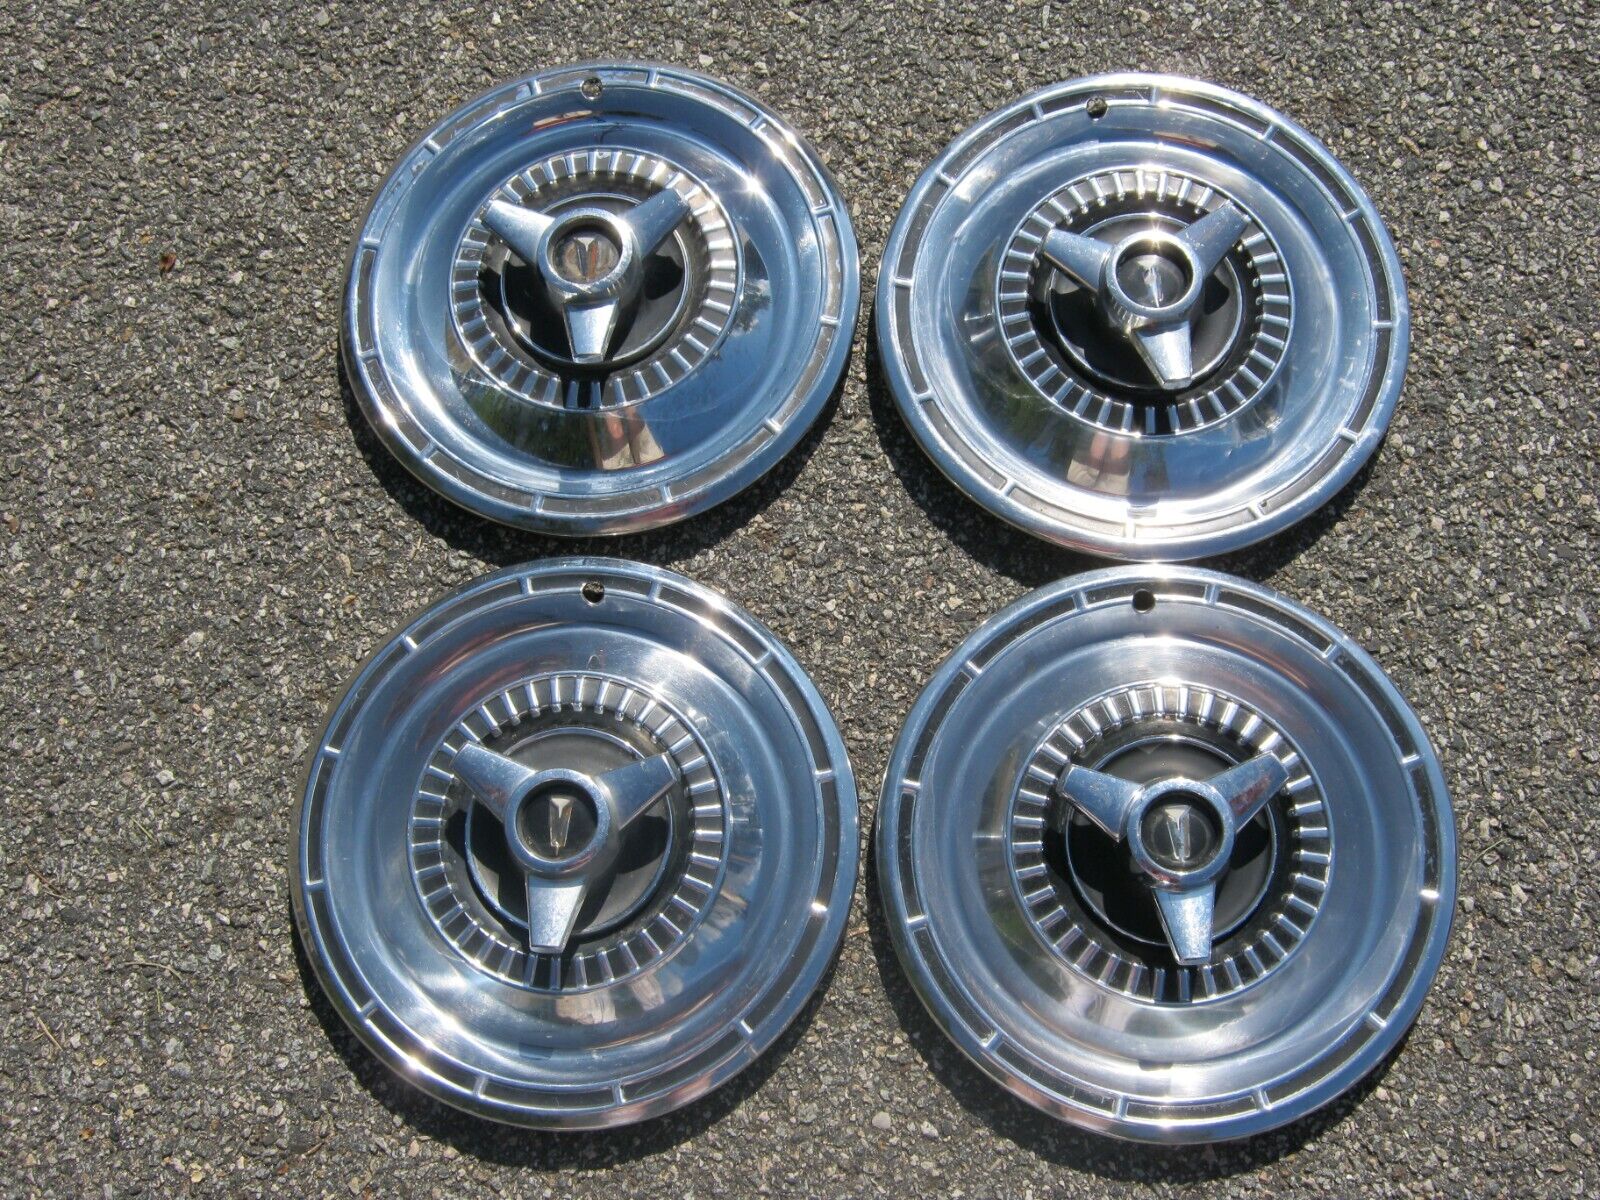 Genuine 1965 Plymouth Belvedere Satellite 14 inch spinner hubcaps wheel covers